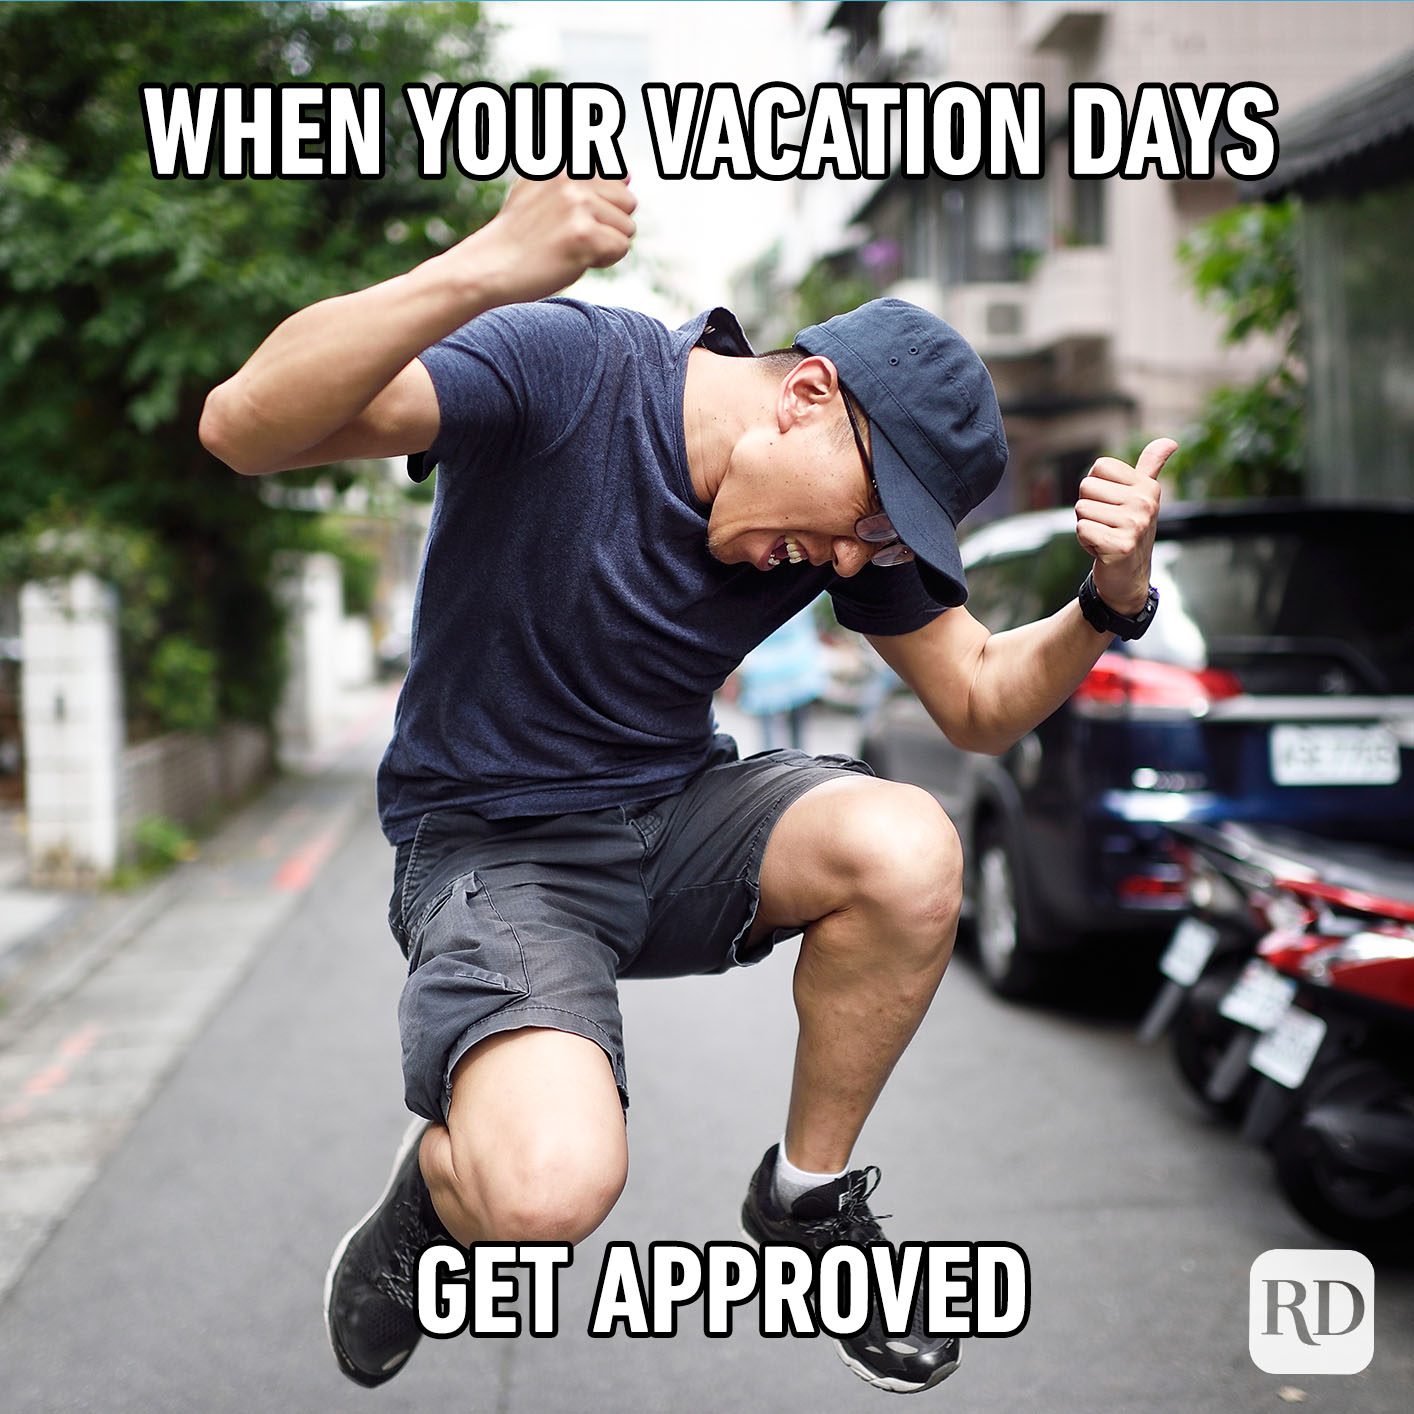 When your vacation days get approved